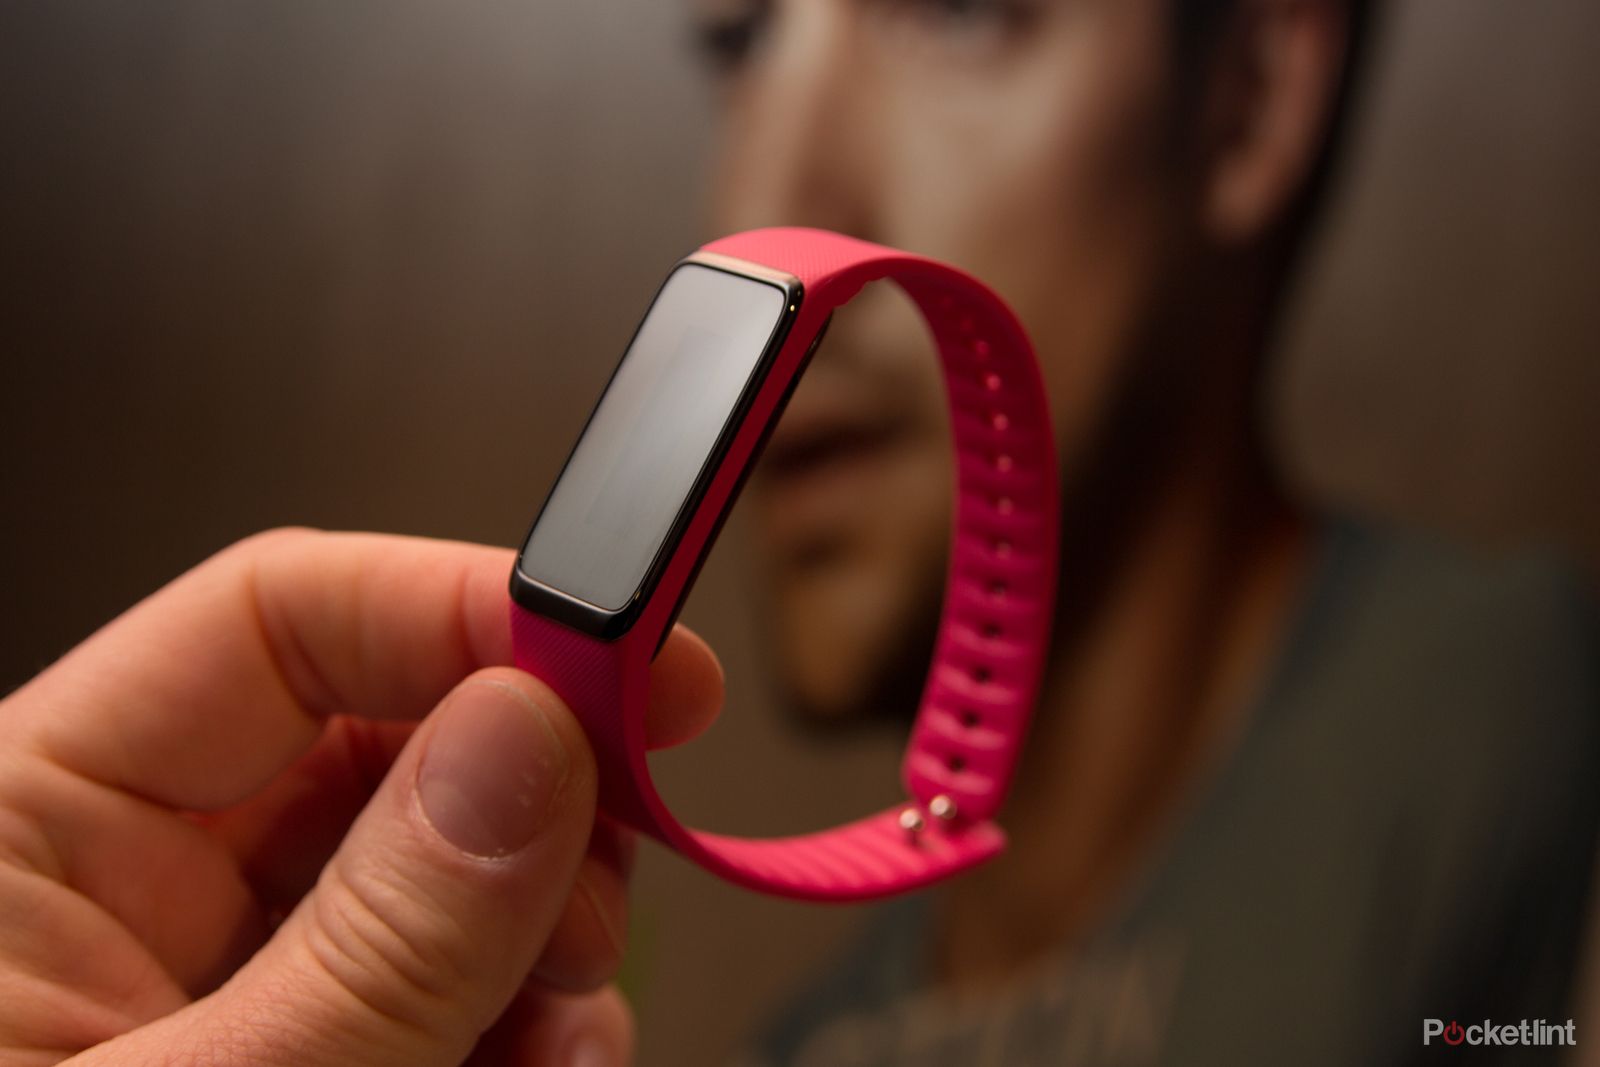 acer liquid leap fitness band has changeable straps works with ios android windows phone image 1